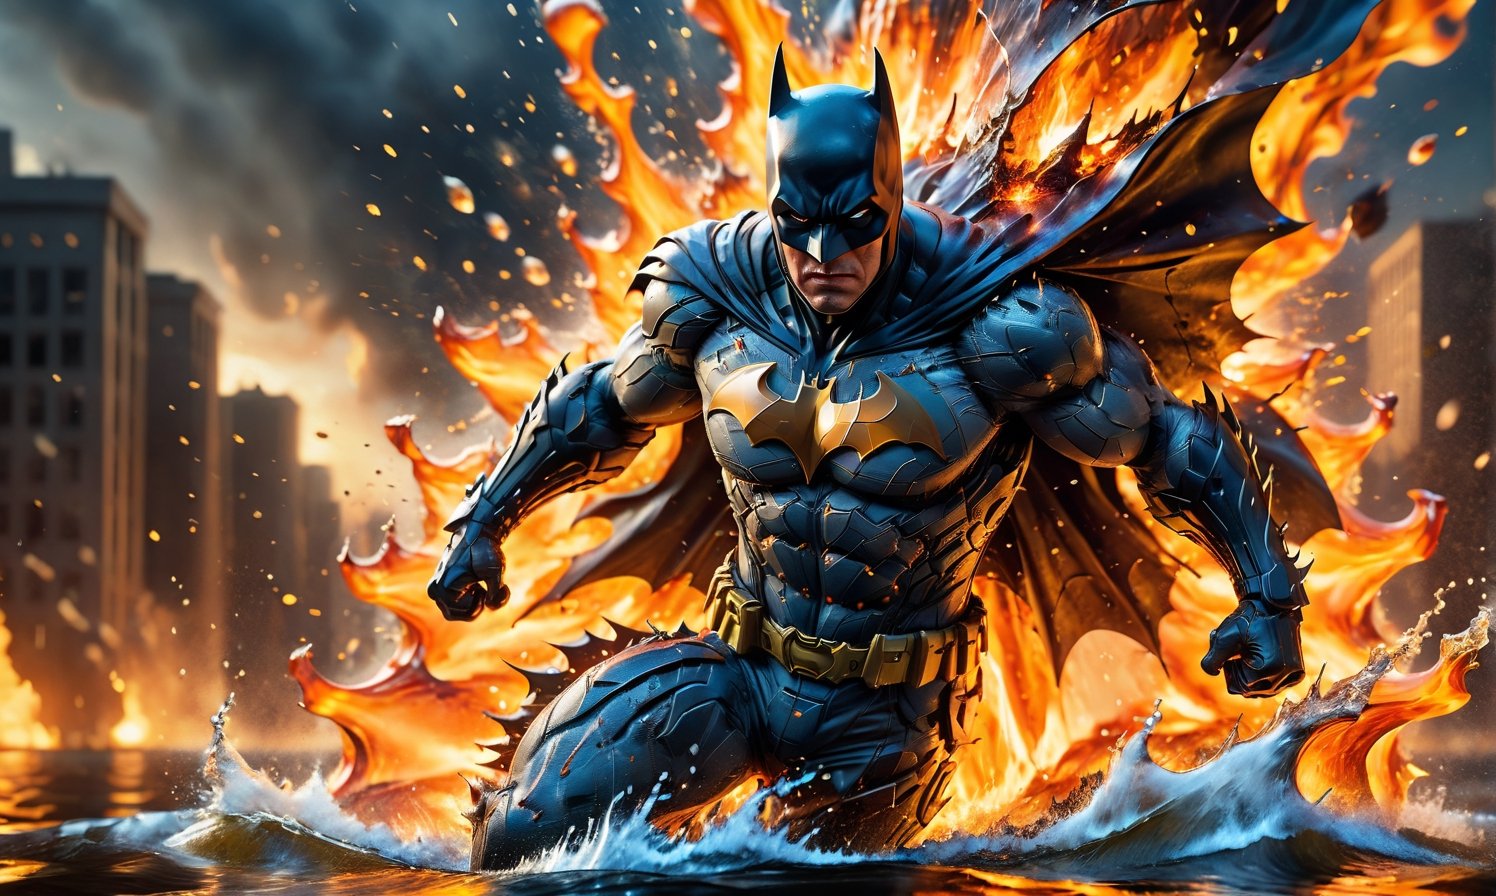 High-Speed Photography of [batman] charging through an exploding [water] , shrapnel and flames surrounding it. Backlit by a massive explosion, dusk, high dynamic range. Shot with Canon EOS 5D Mark IV, directed by Michael Bay
,comic book,DonM3l3m3nt4lXL